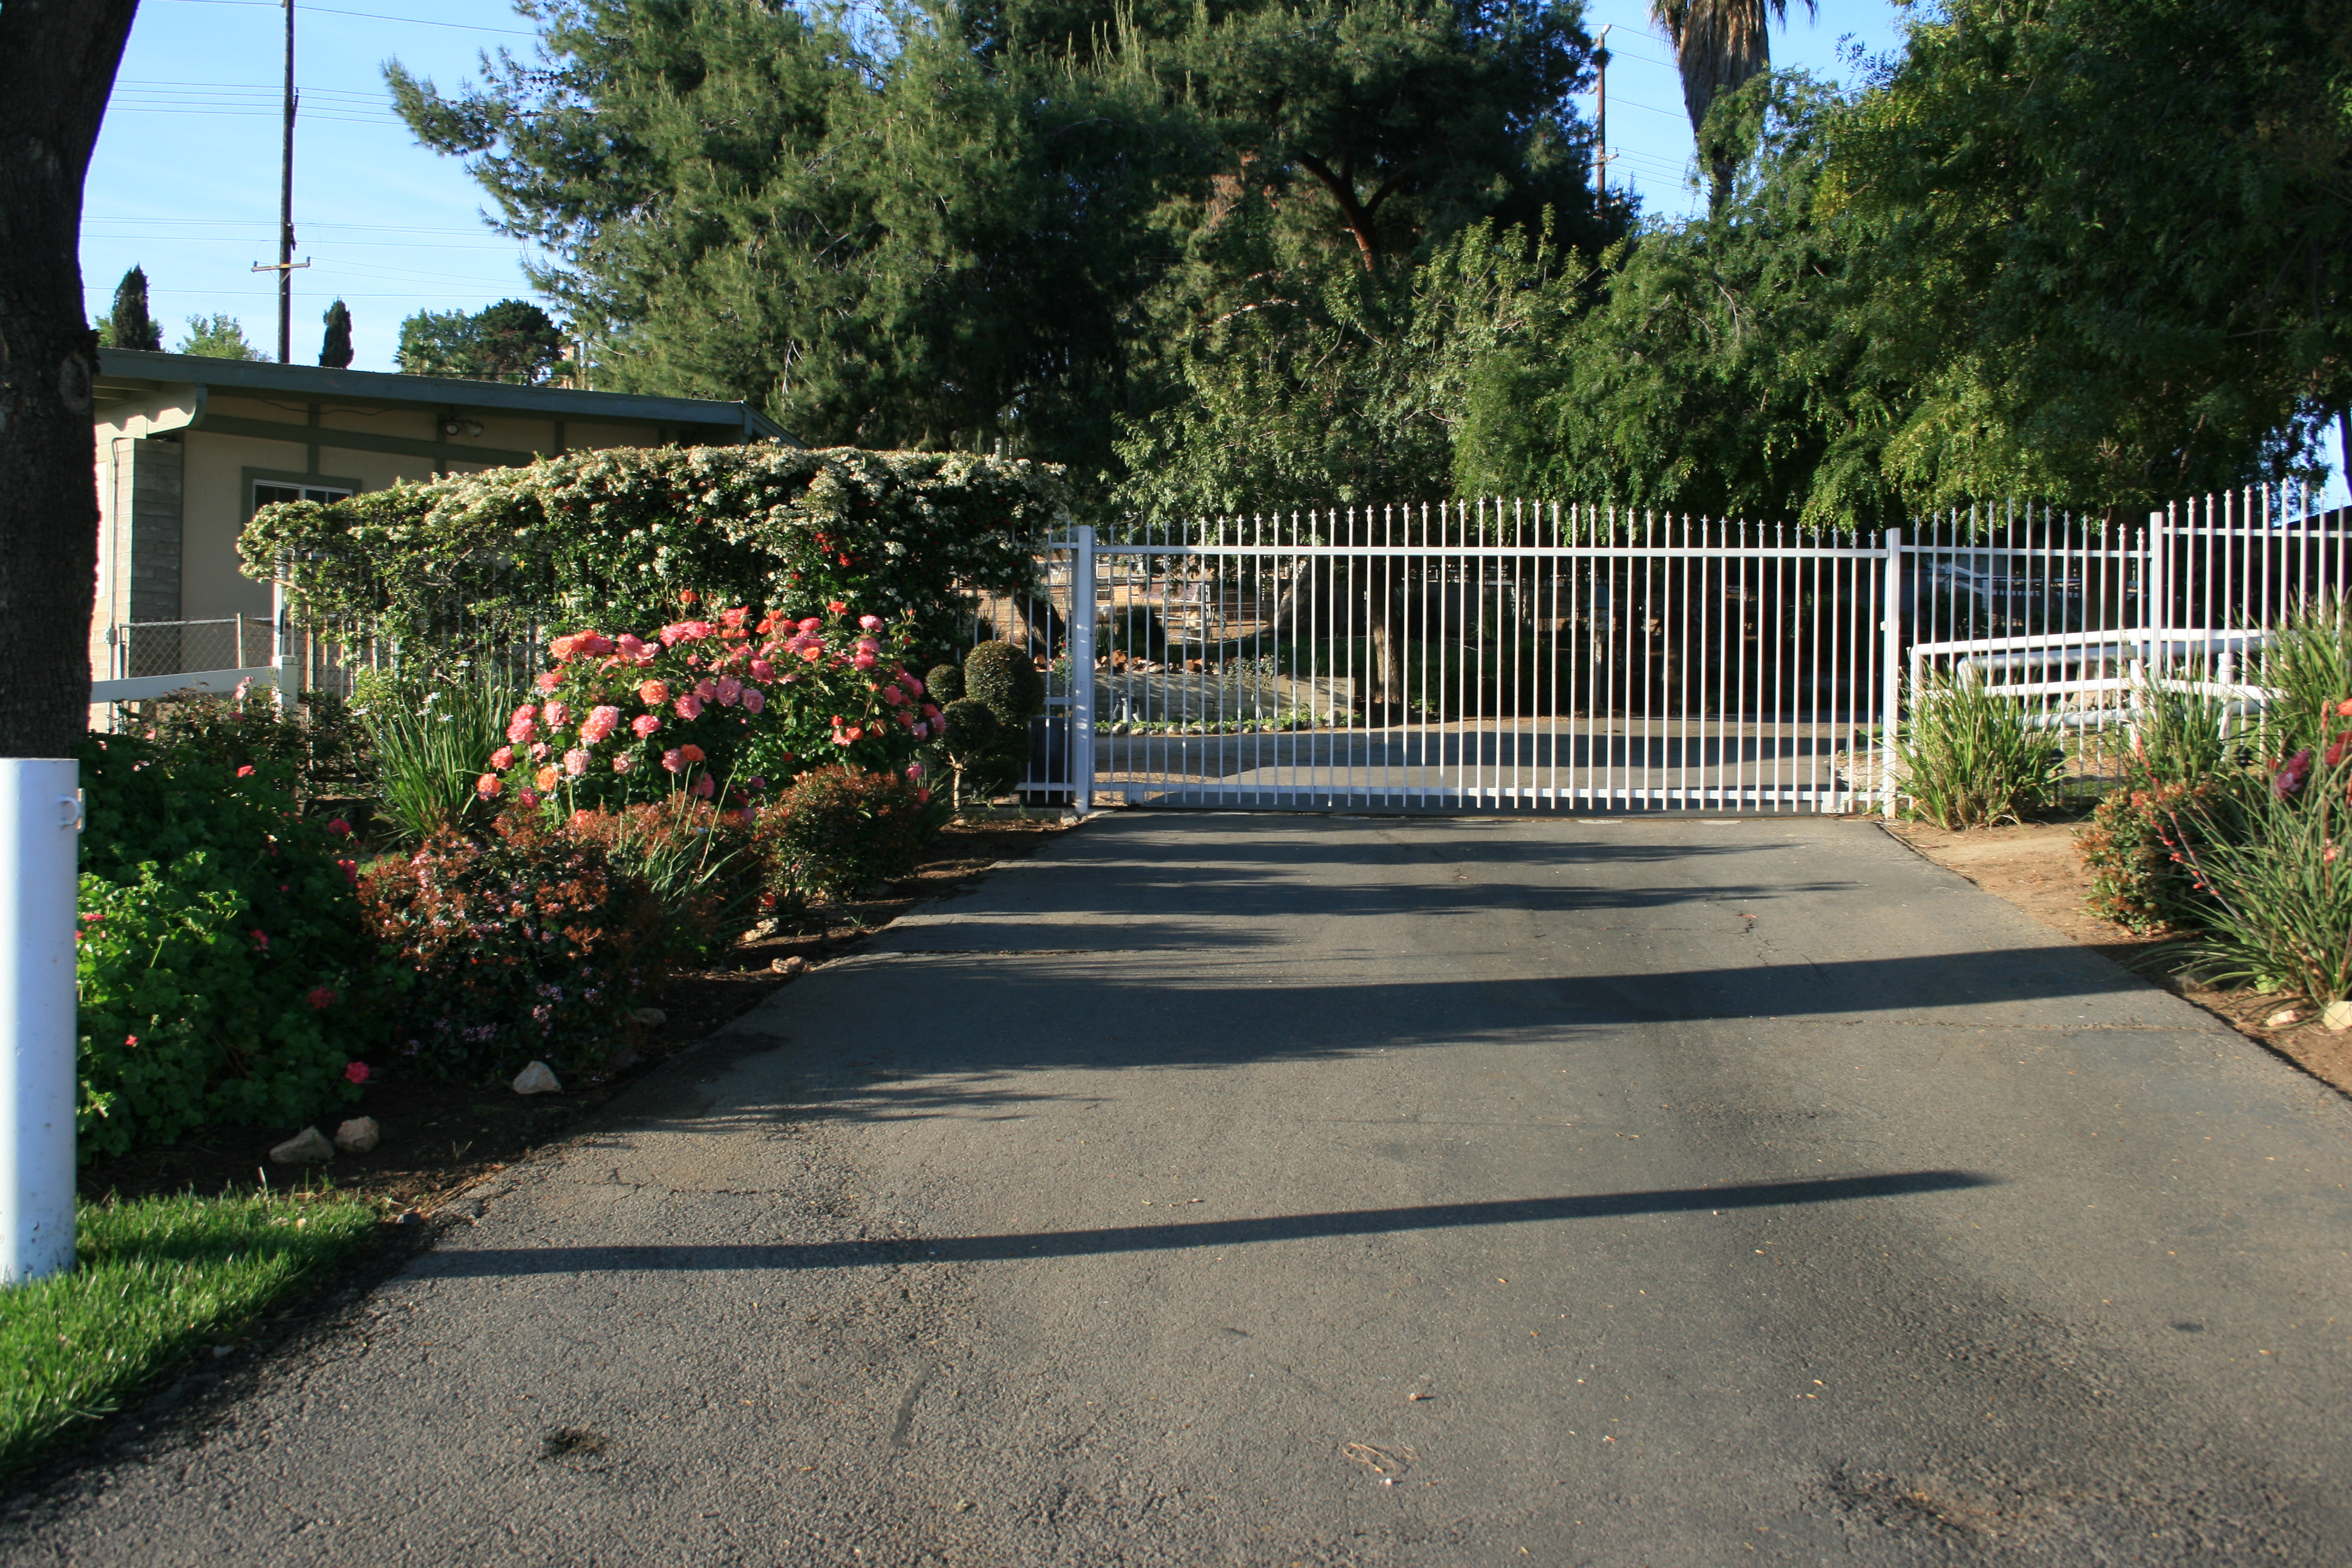 Picture of front gate from street.